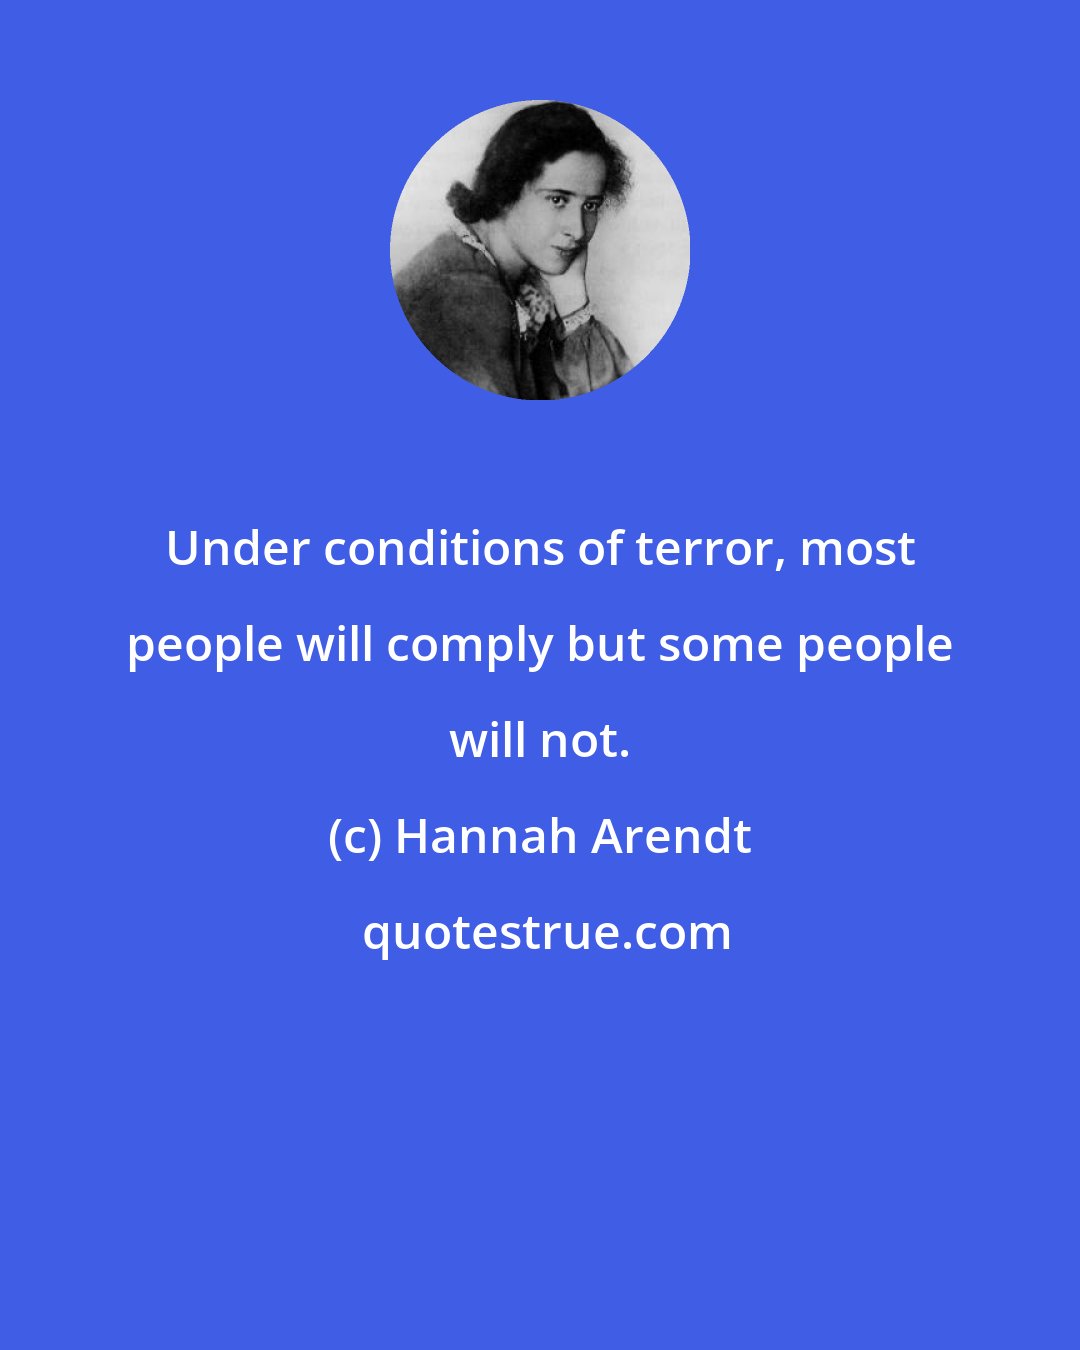 Hannah Arendt: Under conditions of terror, most people will comply but some people will not.